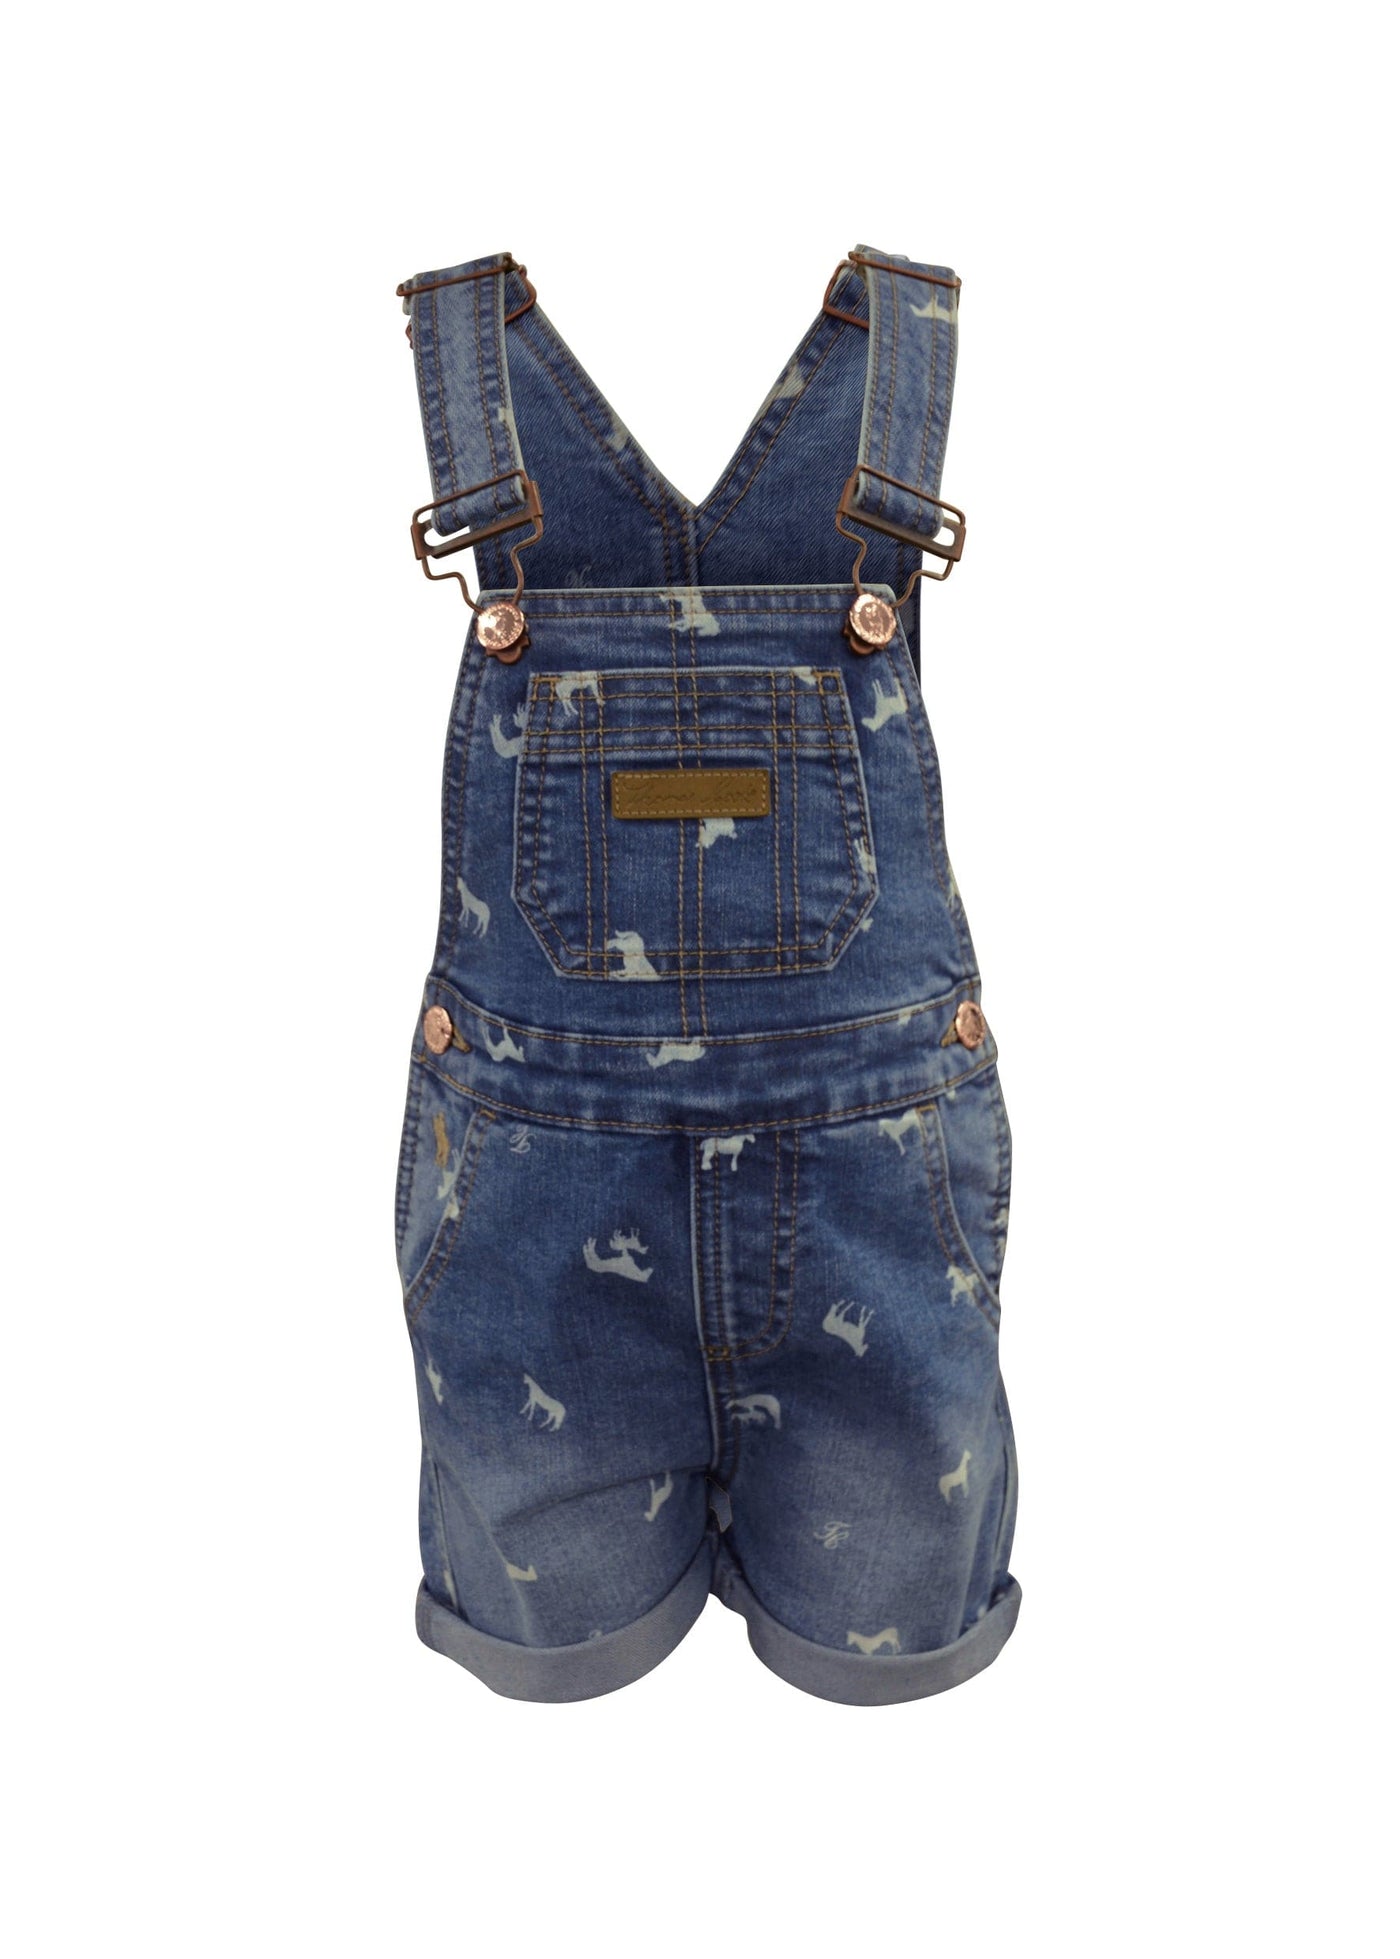 THOMAS COOK BOOTS AND CLOTHING OVERALLS T1S5303072 Girls Dungaree | Horse